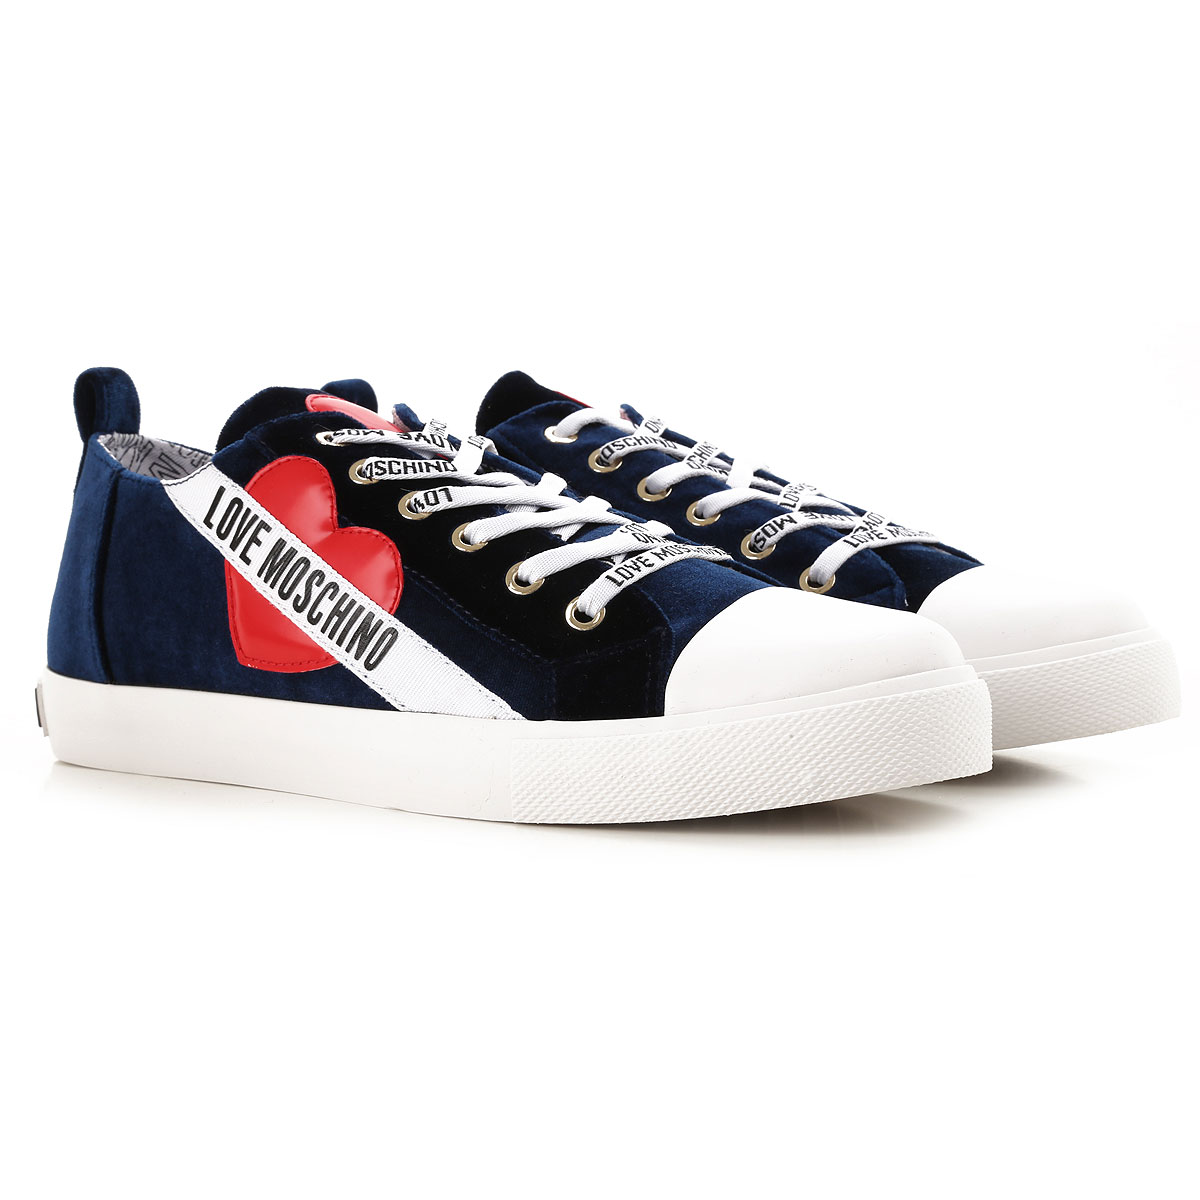 Womens Shoes Moschino, Style code ja15013g1675a